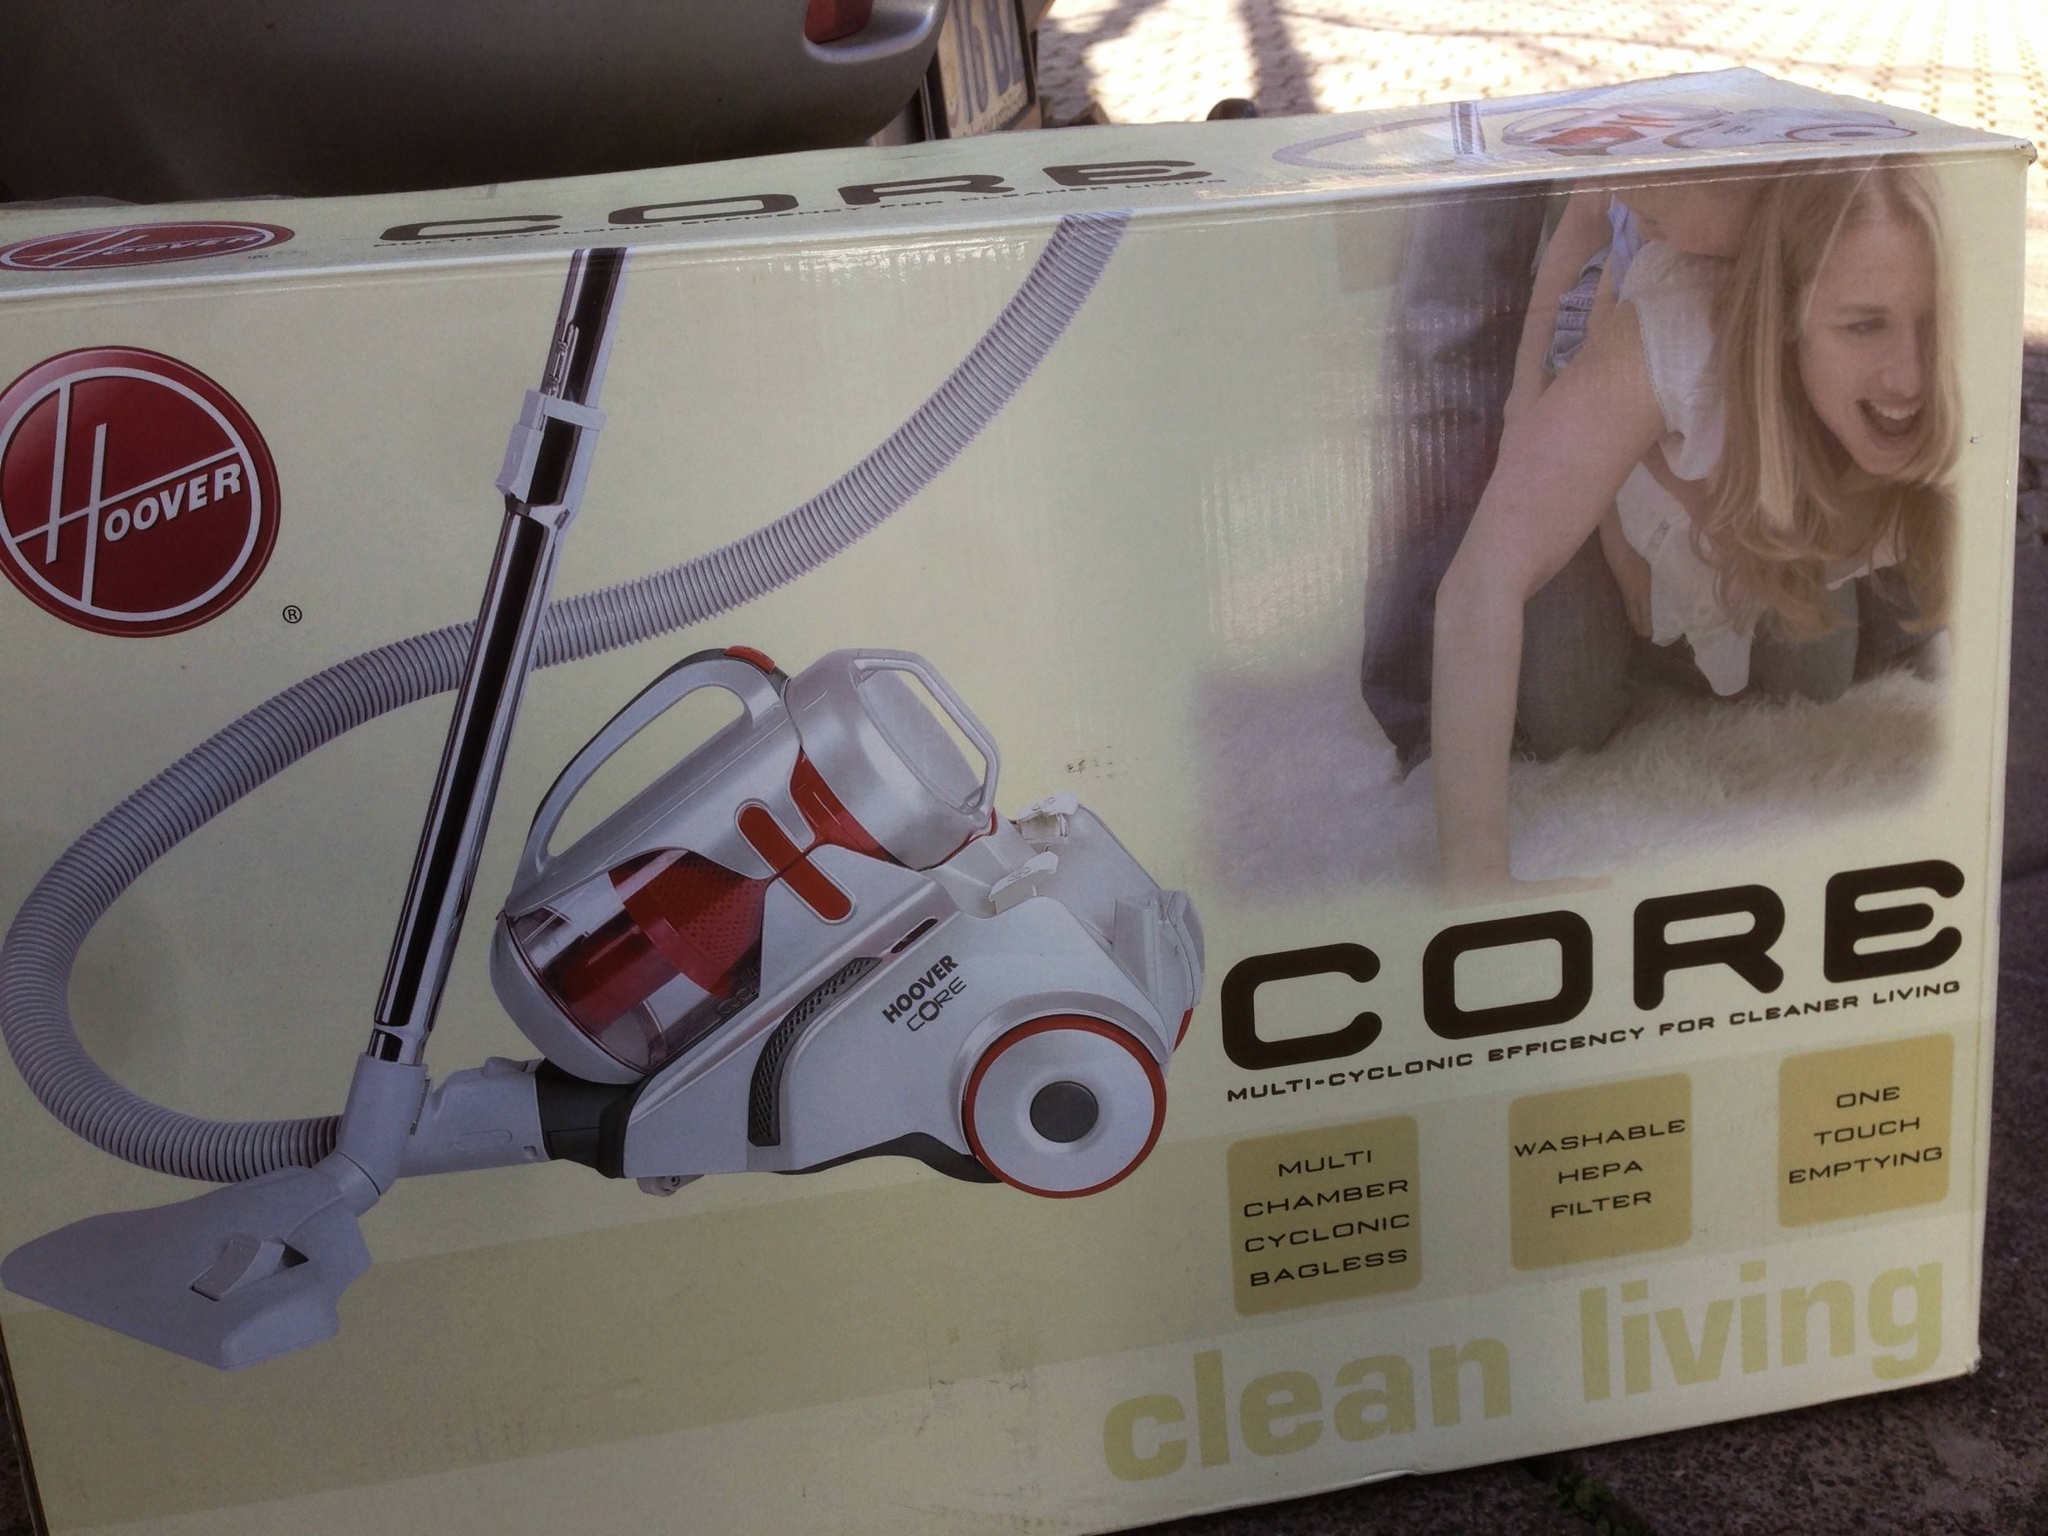 hoover core - O Core Multi Ovolone Prency For Cleaner Living One Touch Was Able Chamber Cyclonic clean living